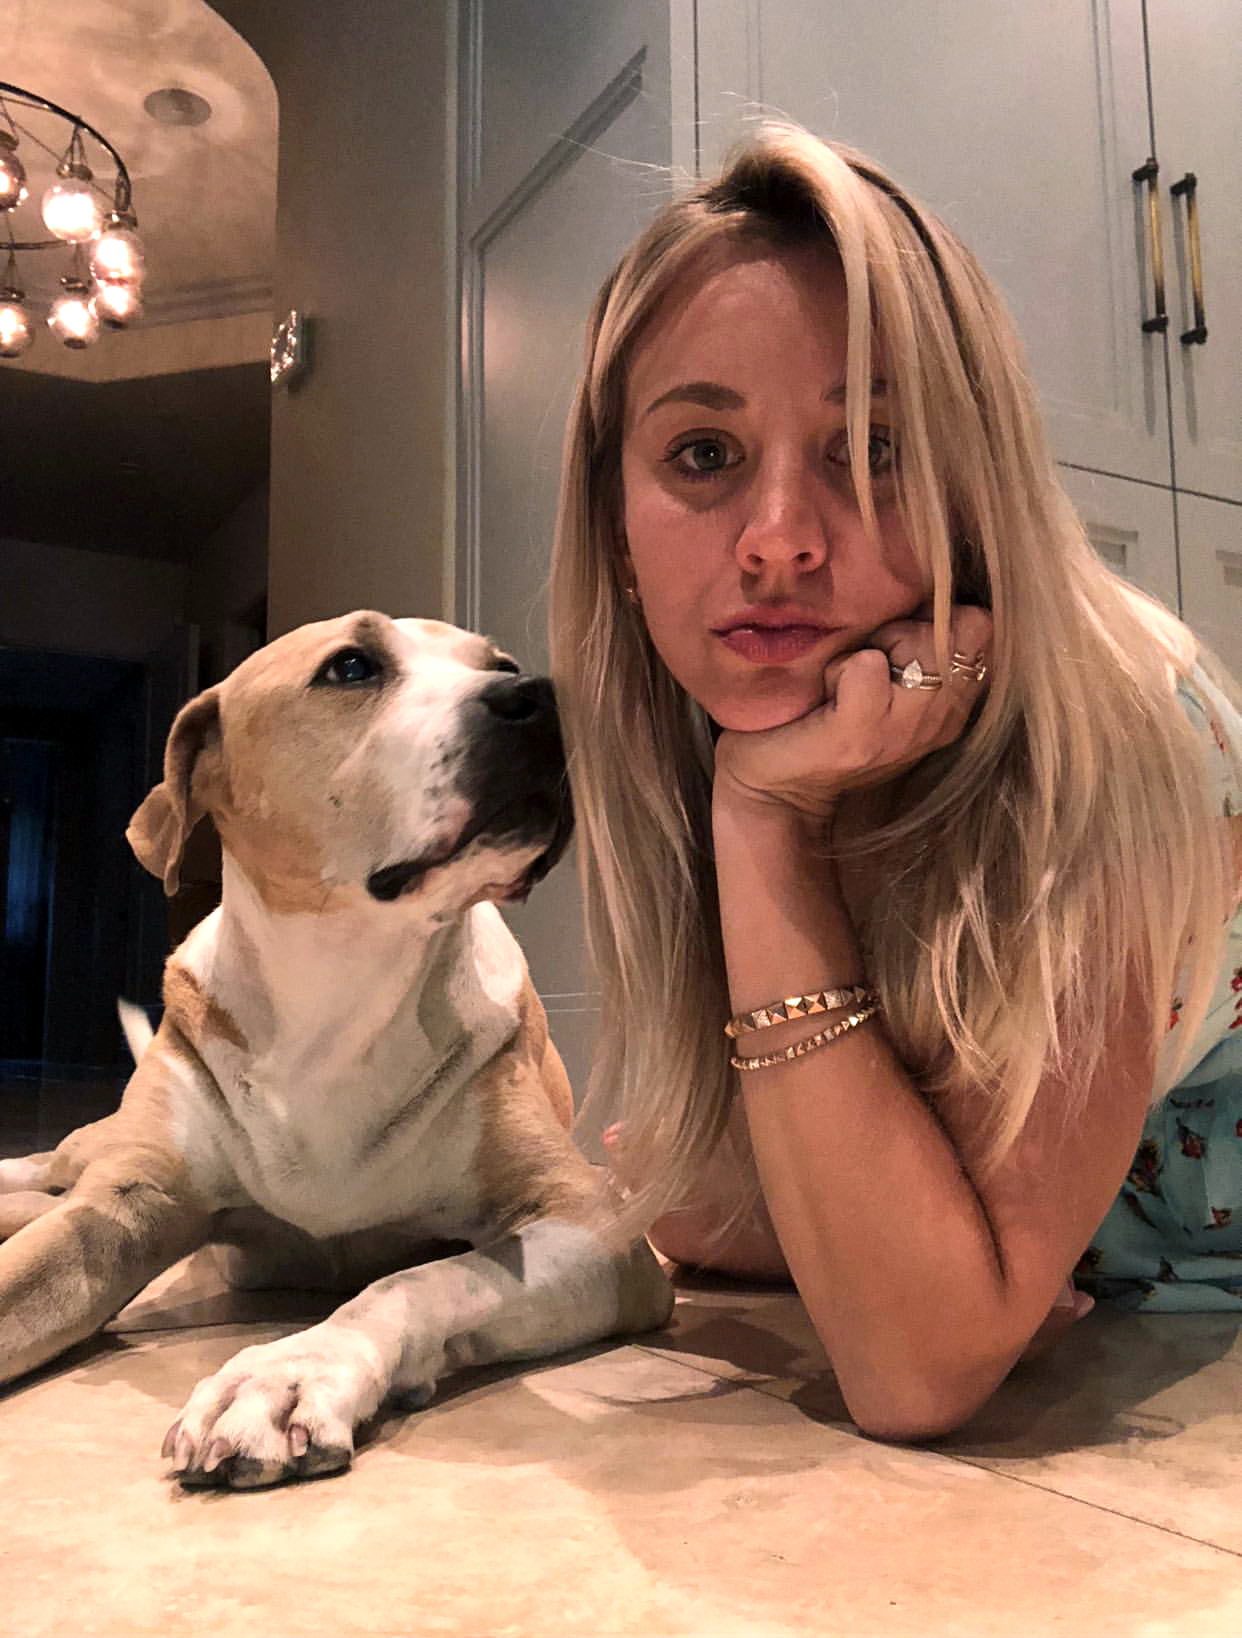 Kaley Cuoco Porn With Captions - Kaley Cuoco Mourns Death of Dog Norman After 14 Years